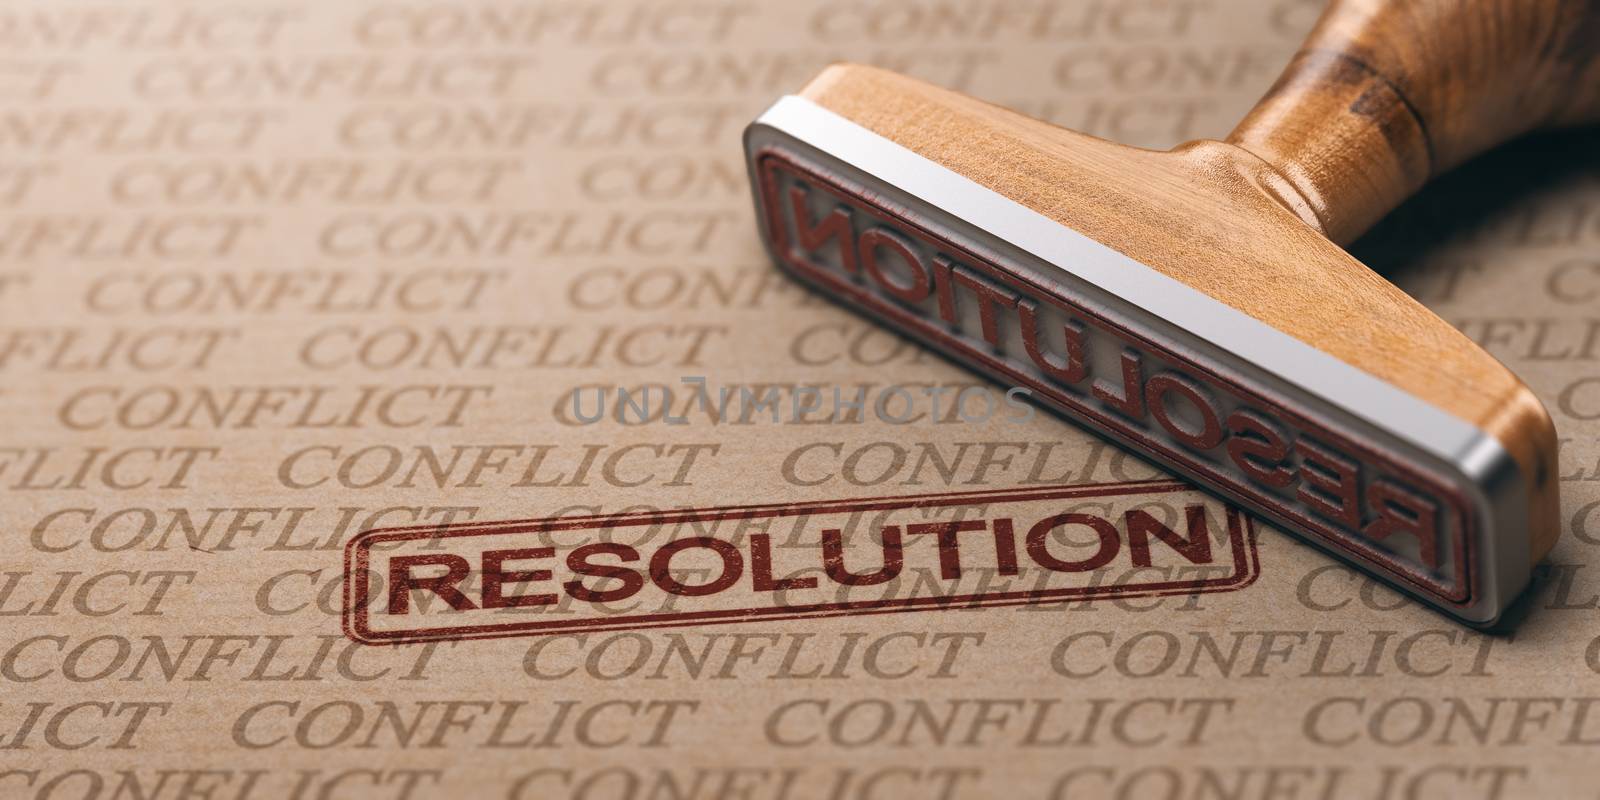 Conflict resolution by Olivier-Le-Moal